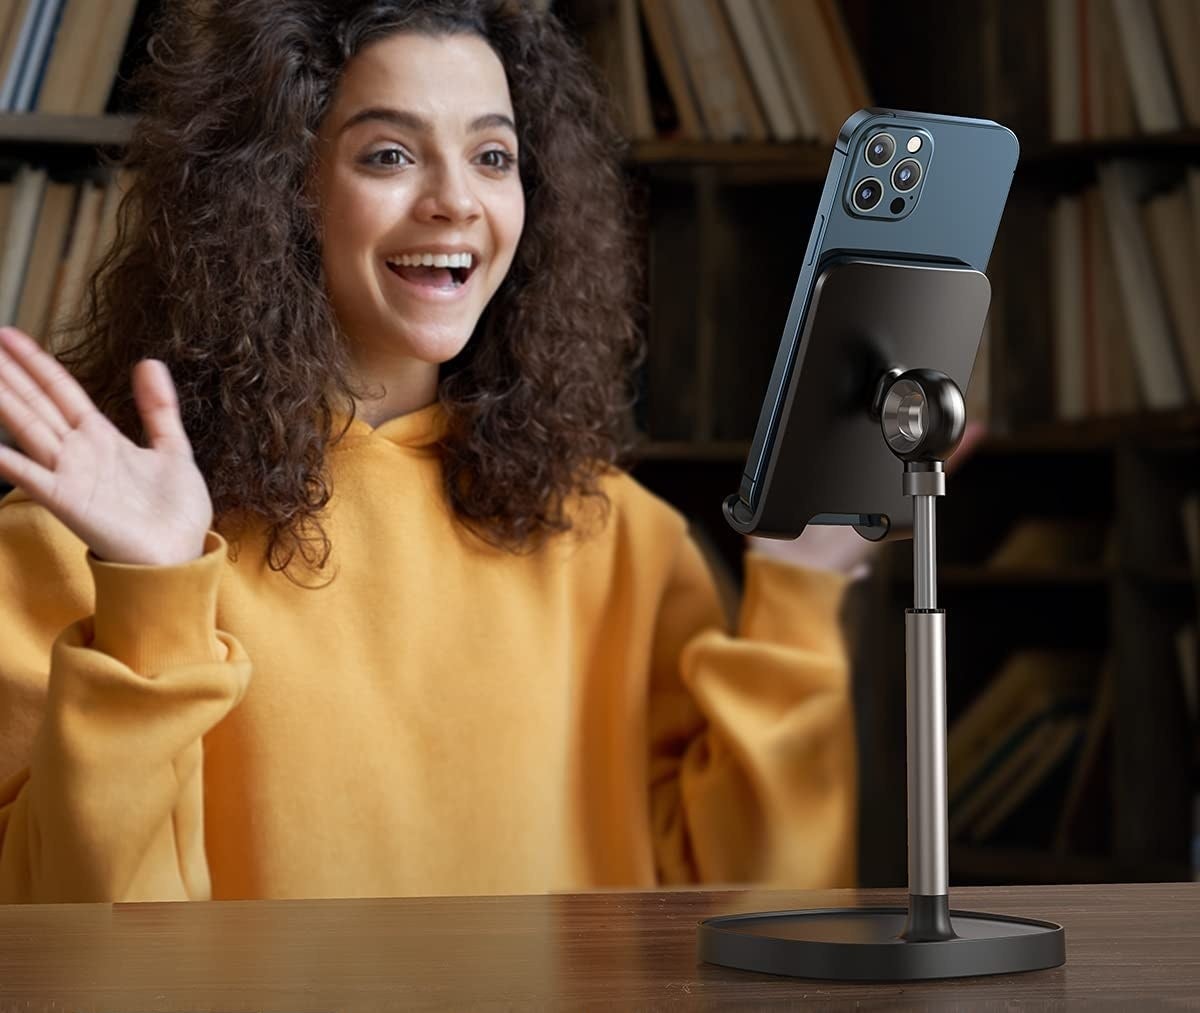 A person video chatting with their phone on a stand on a table in front of them